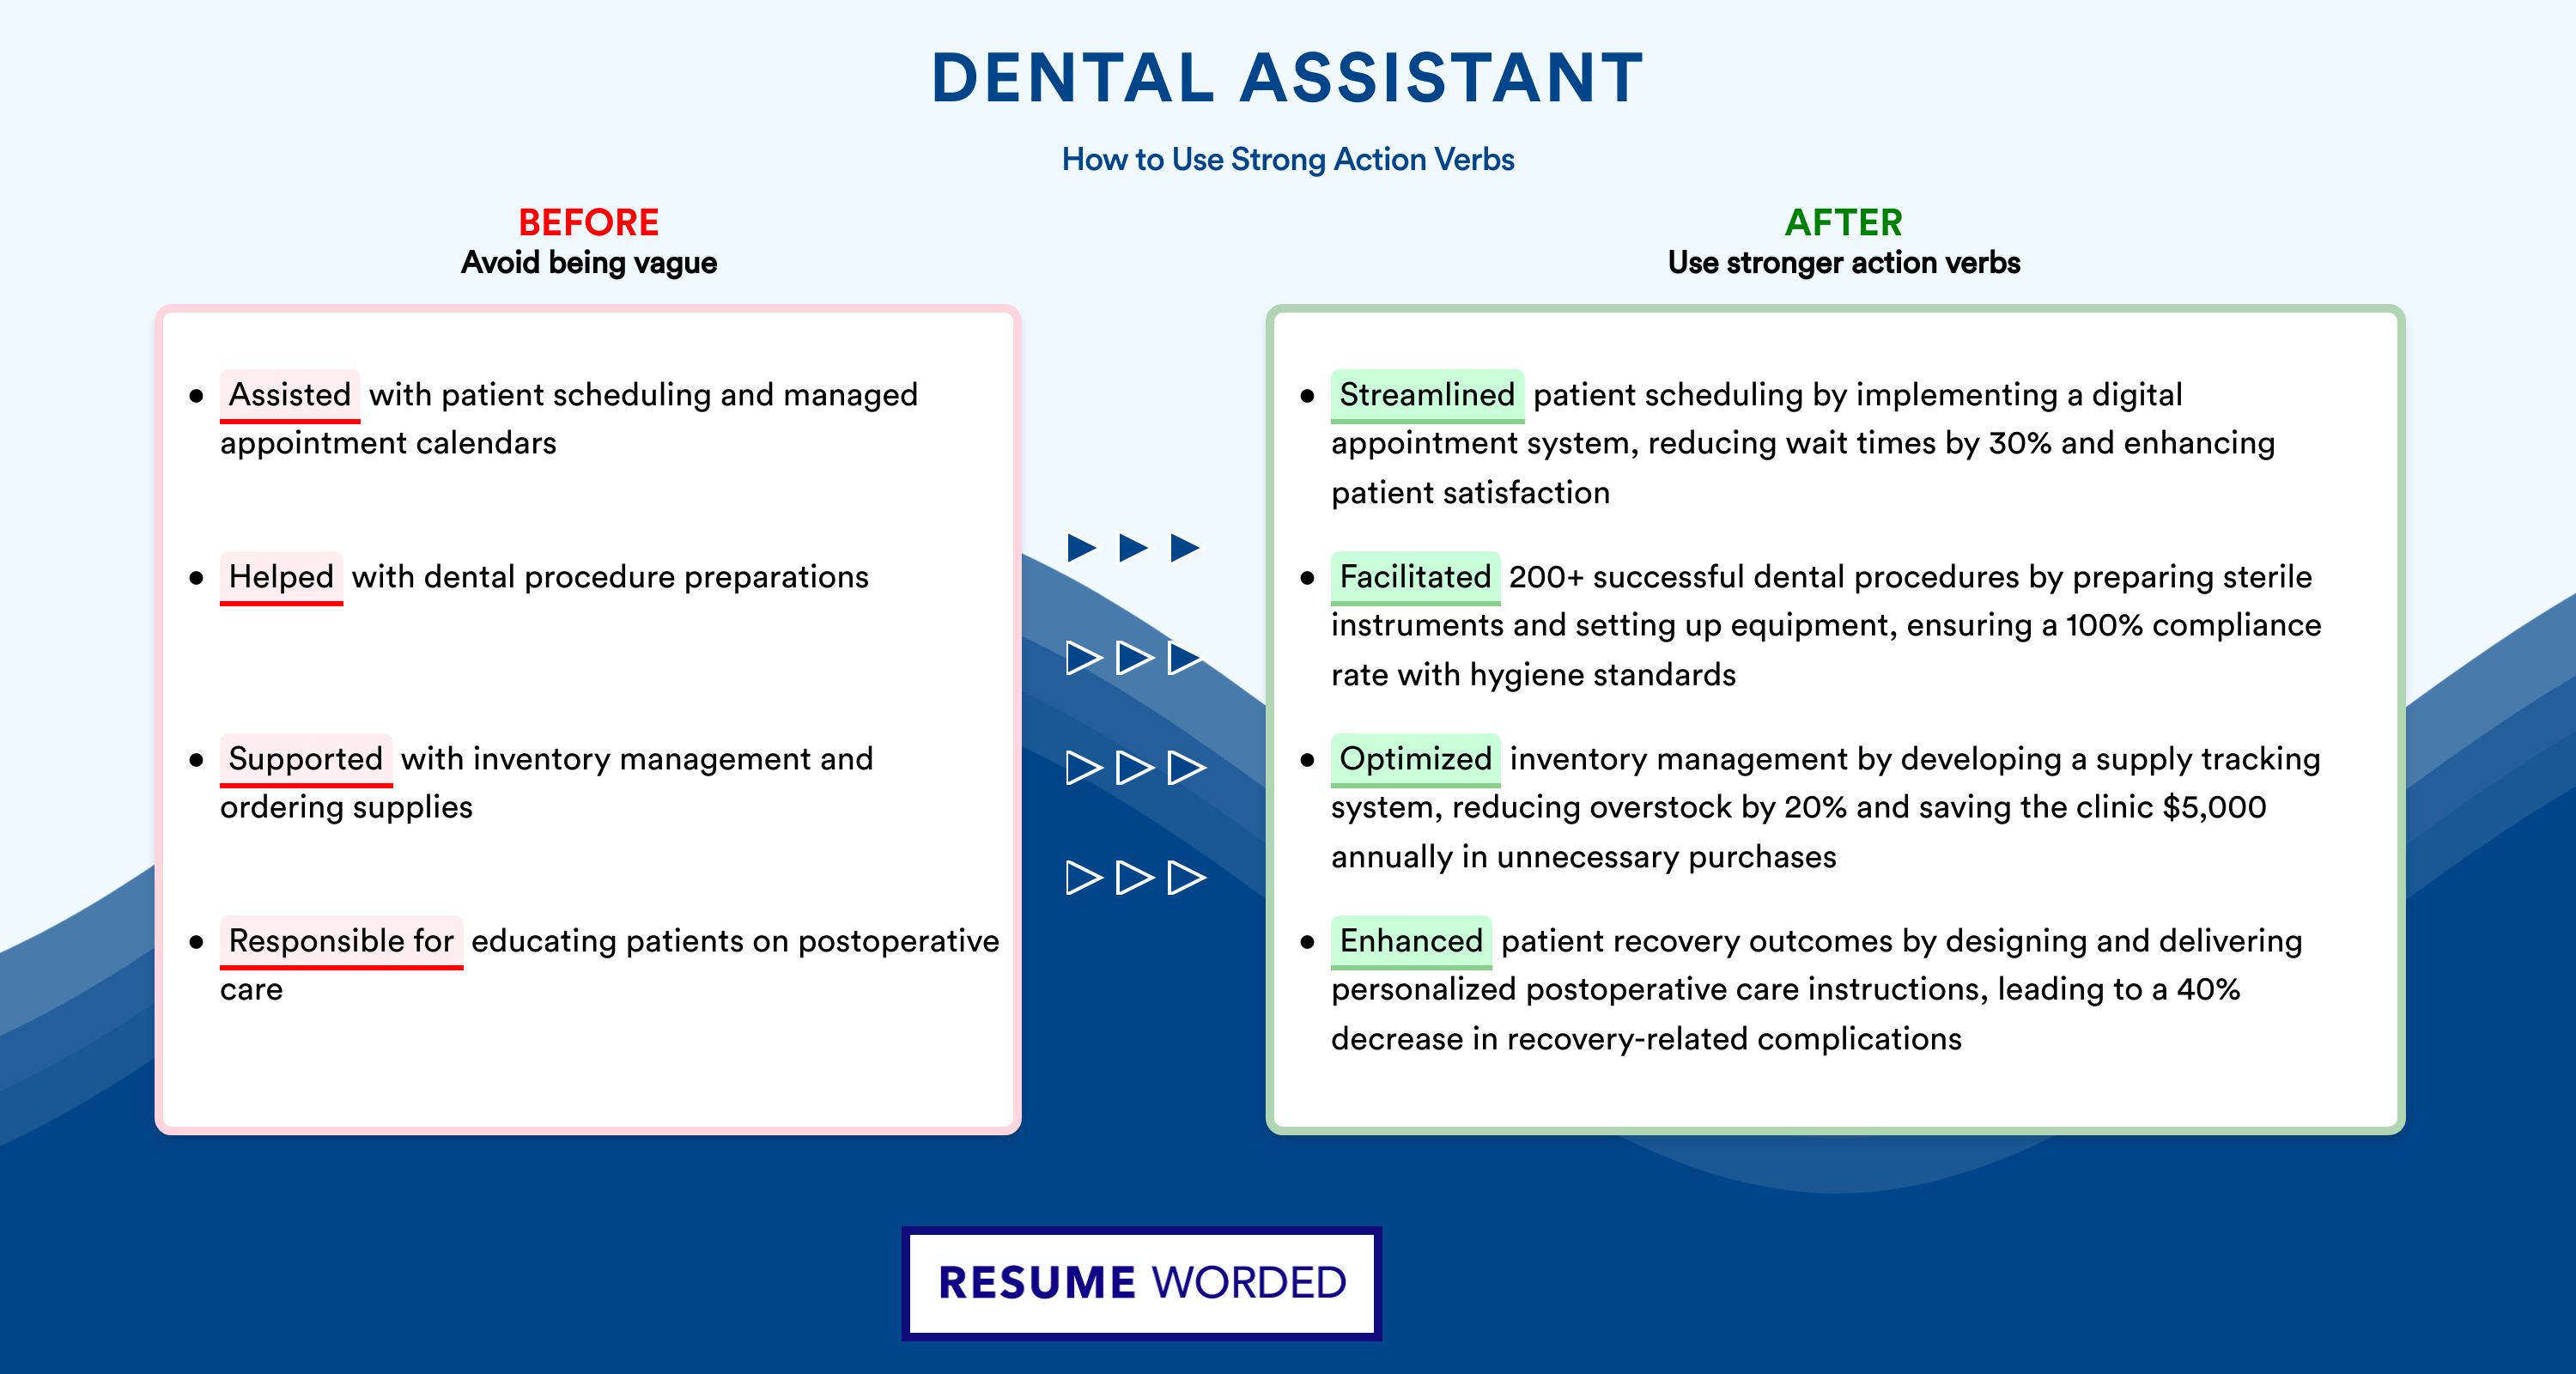 Action Verbs for Dental Assistant